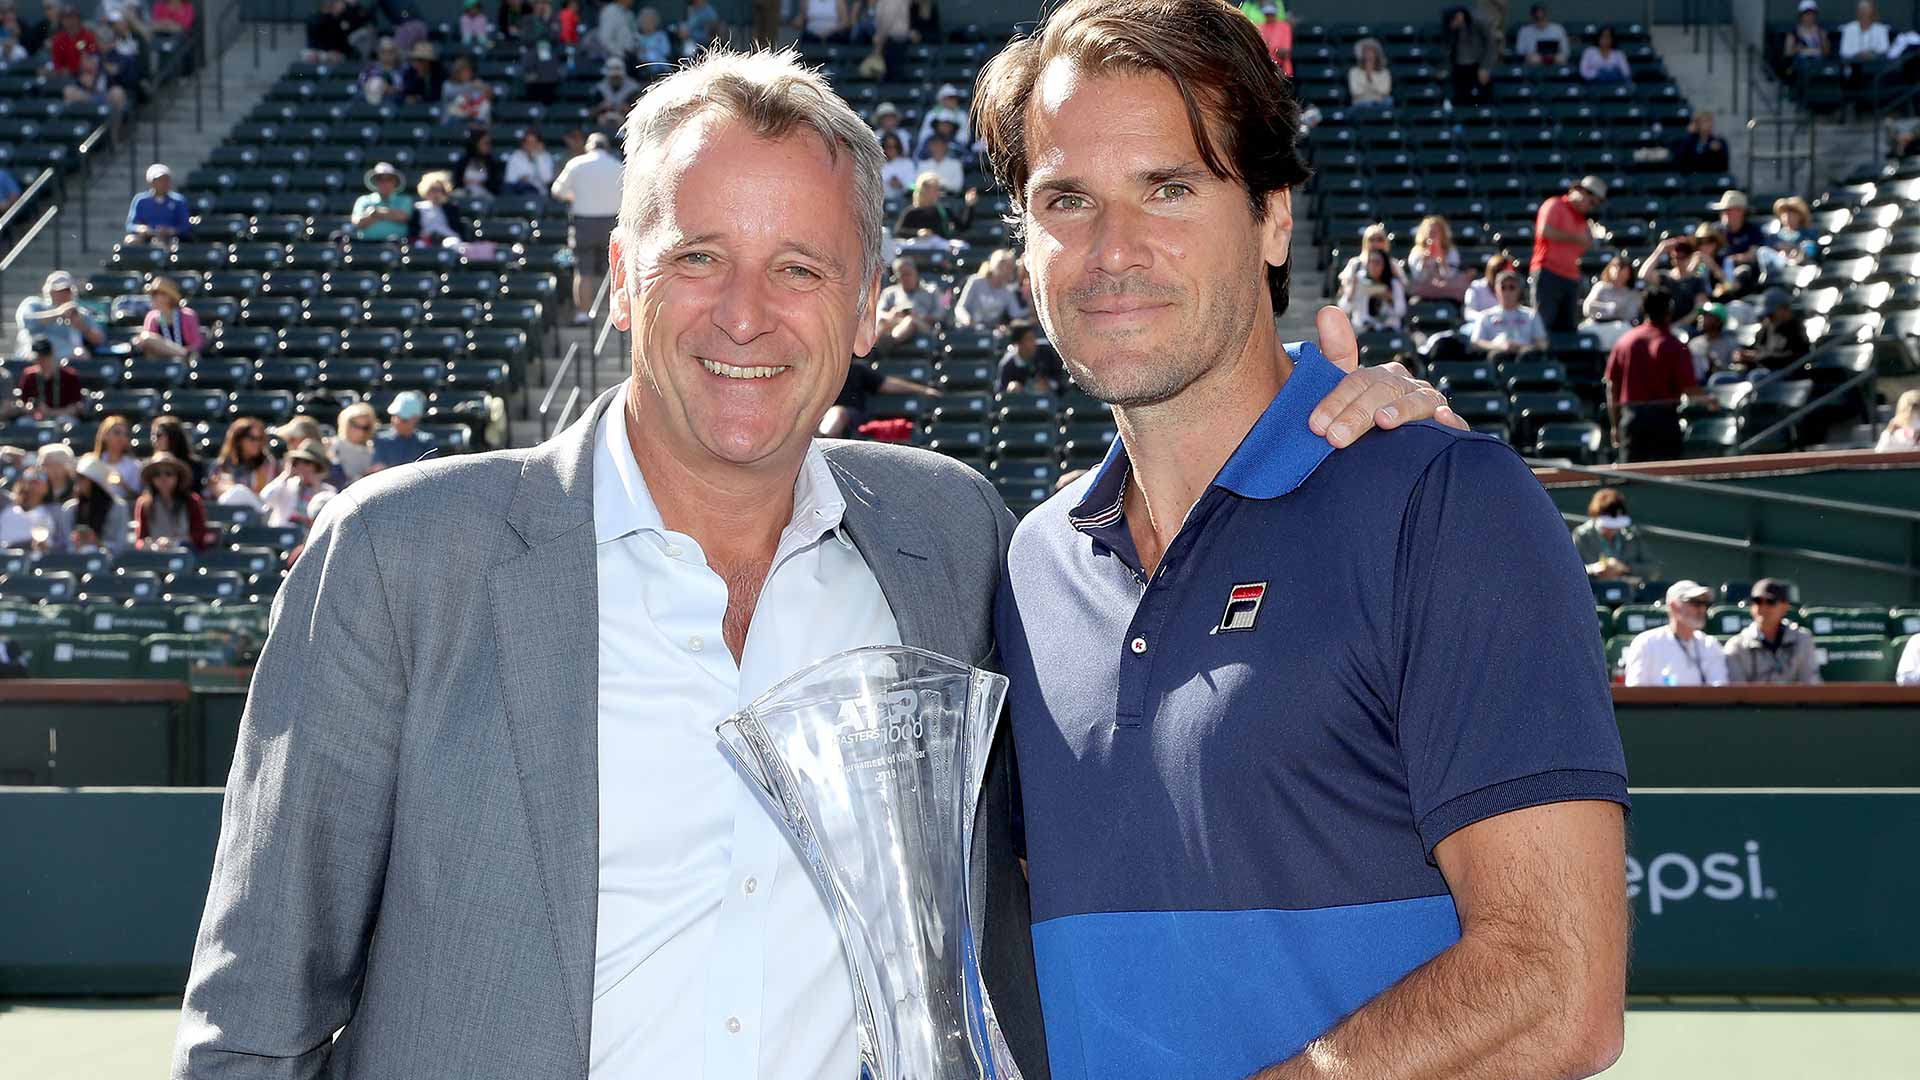 ATP Executive Chairman & President <a href='https://www.atptour.com/en/players/chris-kermode/k007/overview'>Chris Kermode</a> presents <a href='https://www.atptour.com/en/tournaments/indian-wells/404/overview'>BNP Paribas Open</a> Tournament Director <a href='https://www.atptour.com/en/players/tommy-haas/h355/overview'>Tommy Haas</a> with the ATP Masters 1000 Tournament of the Year trophy in the 2018 ATP Awards. 